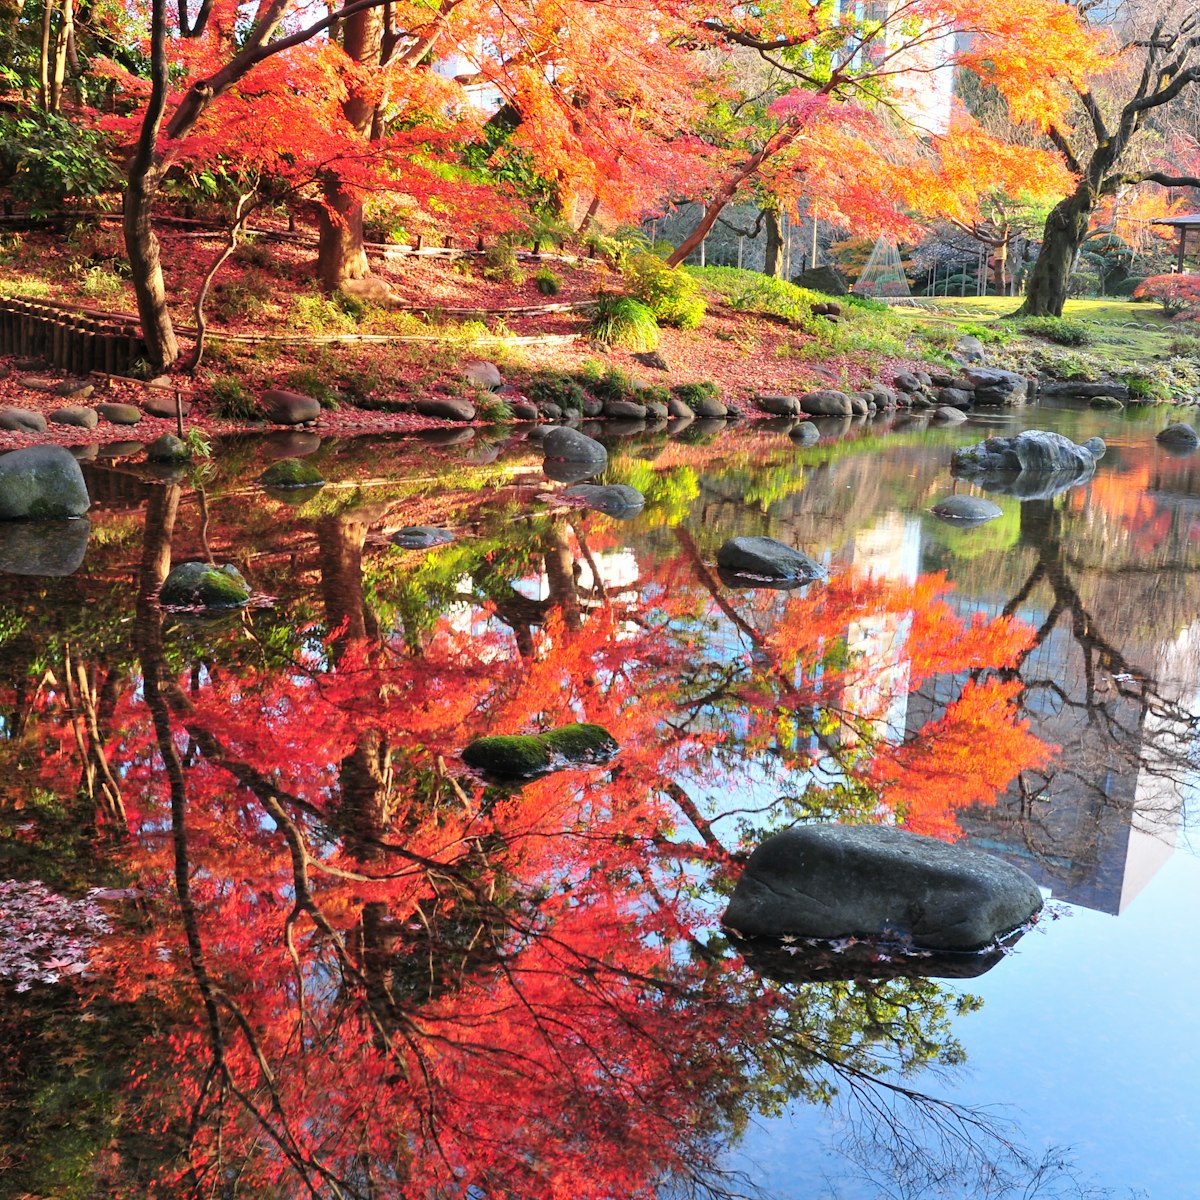 Autumn in Japan is very attractive season for its beautiful colors of Japanese maple, gingko and other trees.